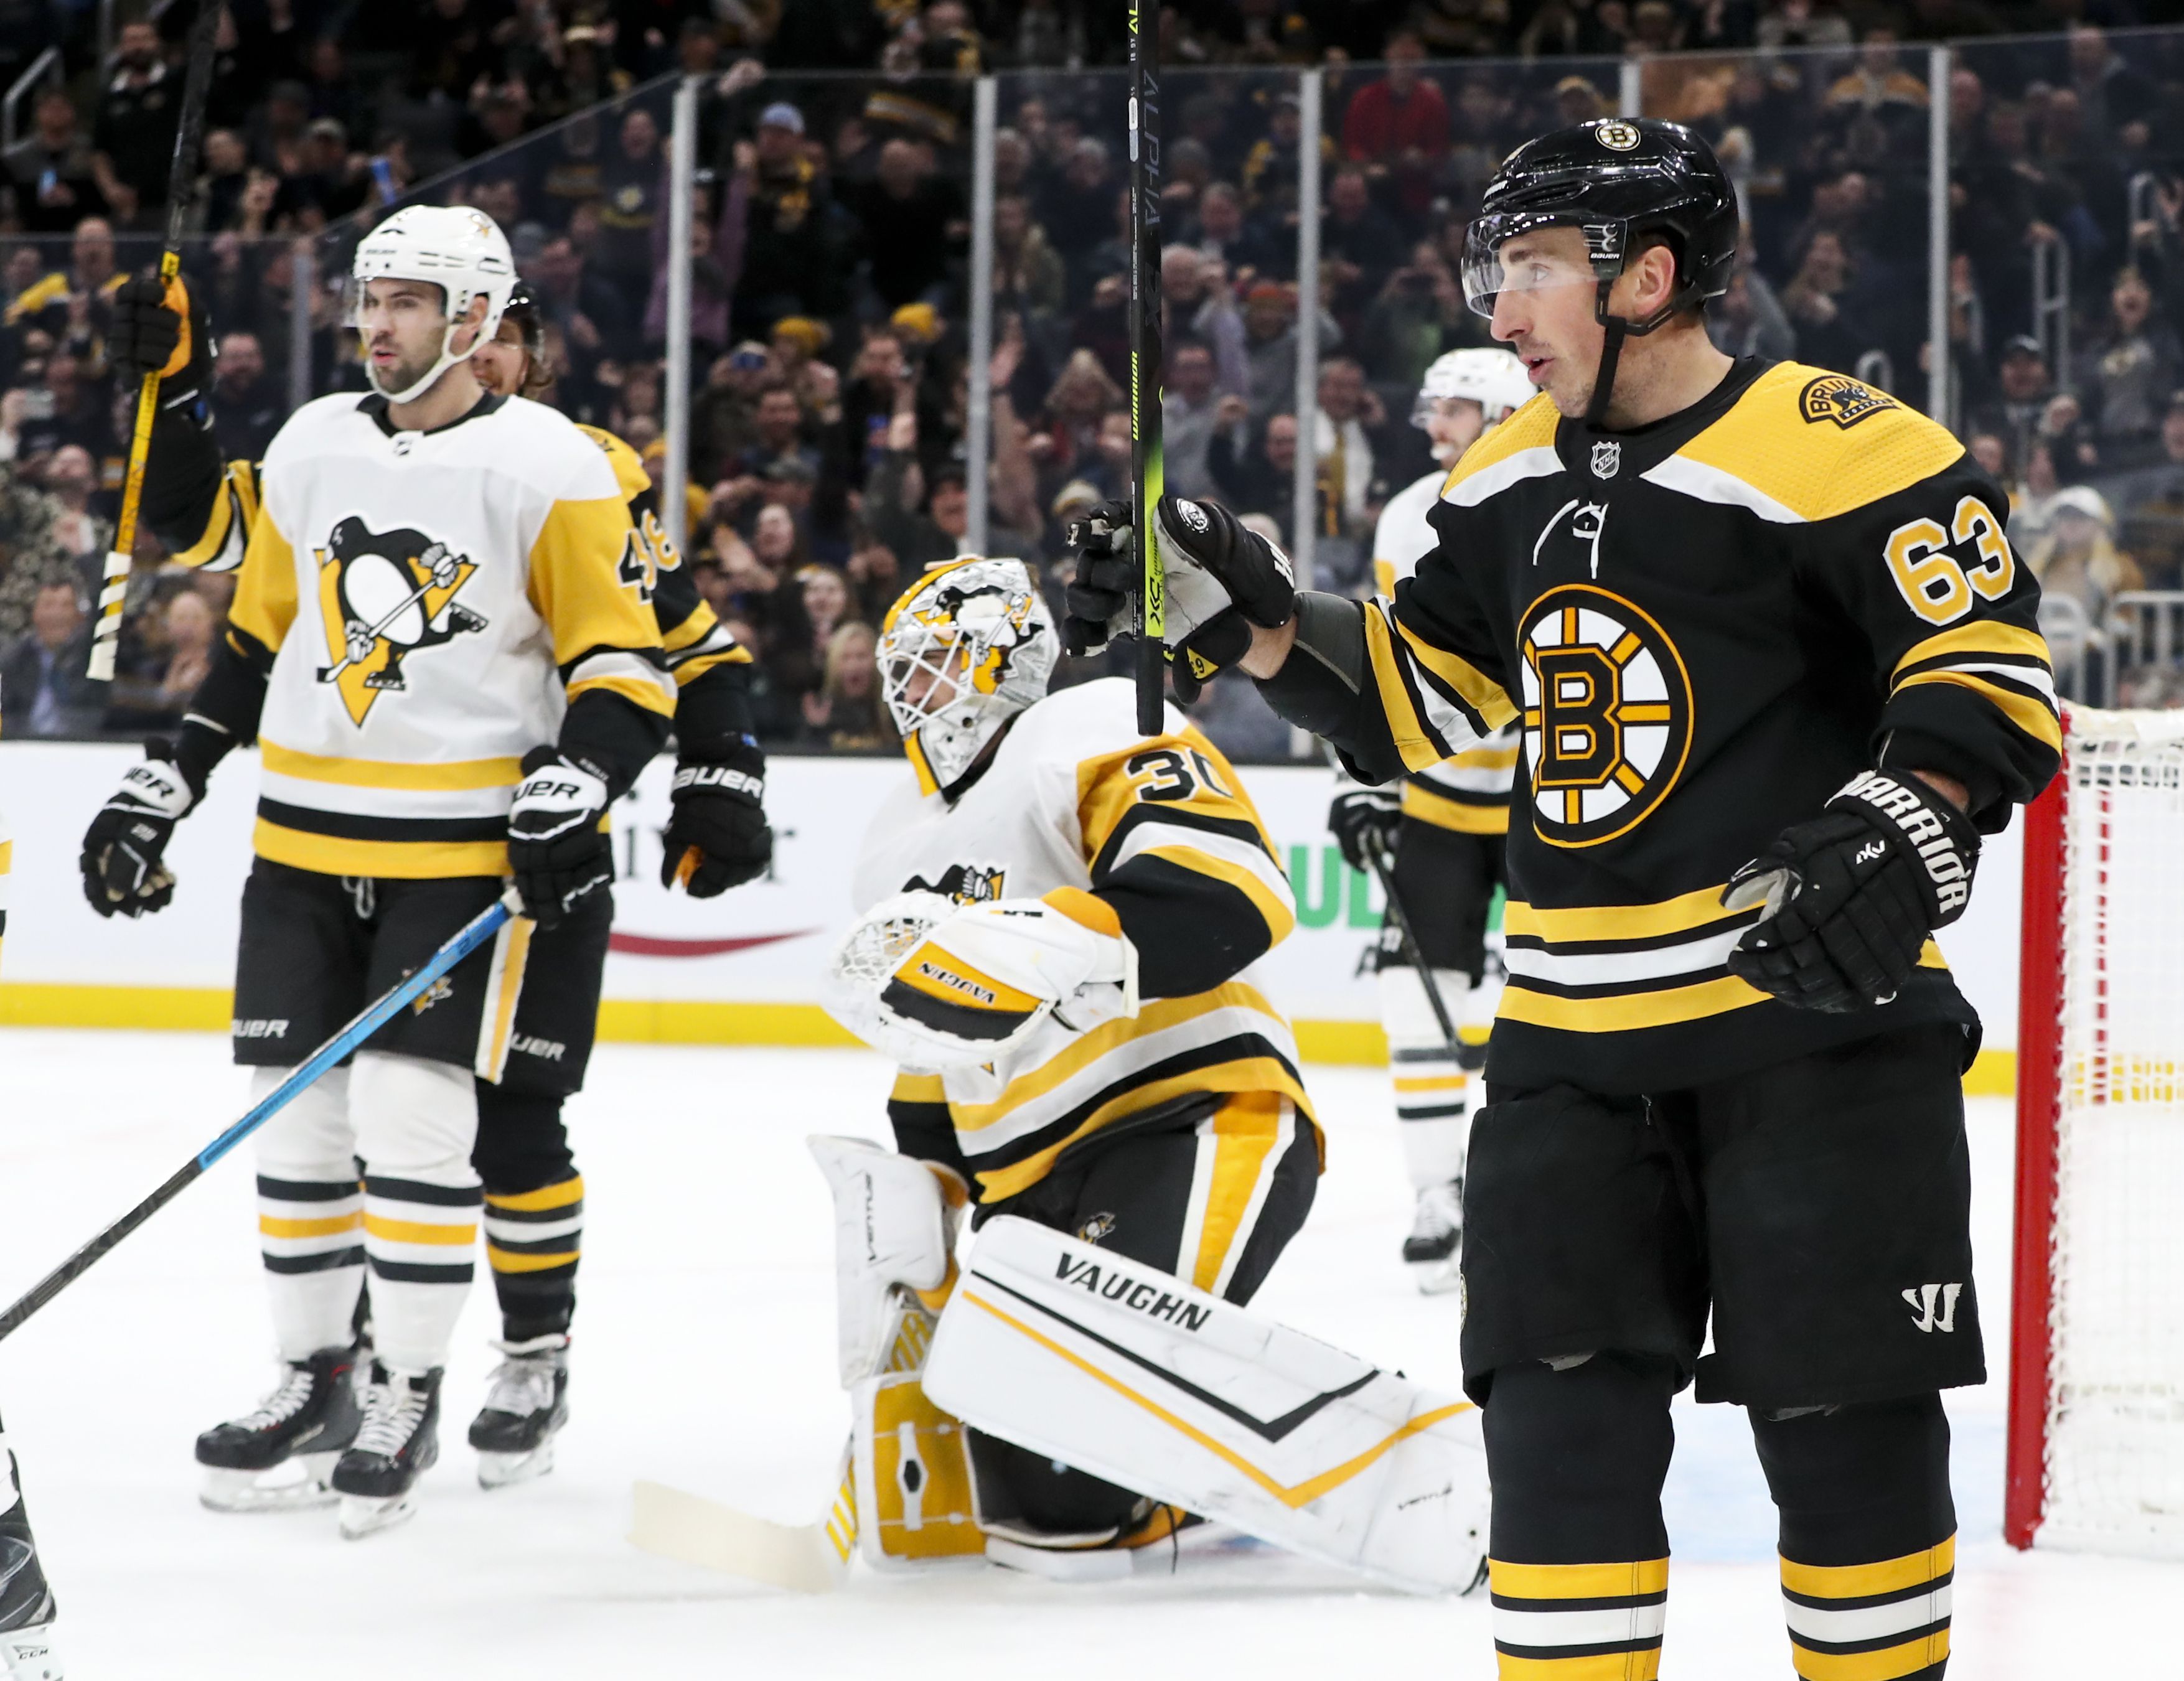 Despite Panthers' goading, Brad Marchand has been a leader, not a follower,  when things get rough after the whistle - The Boston Globe